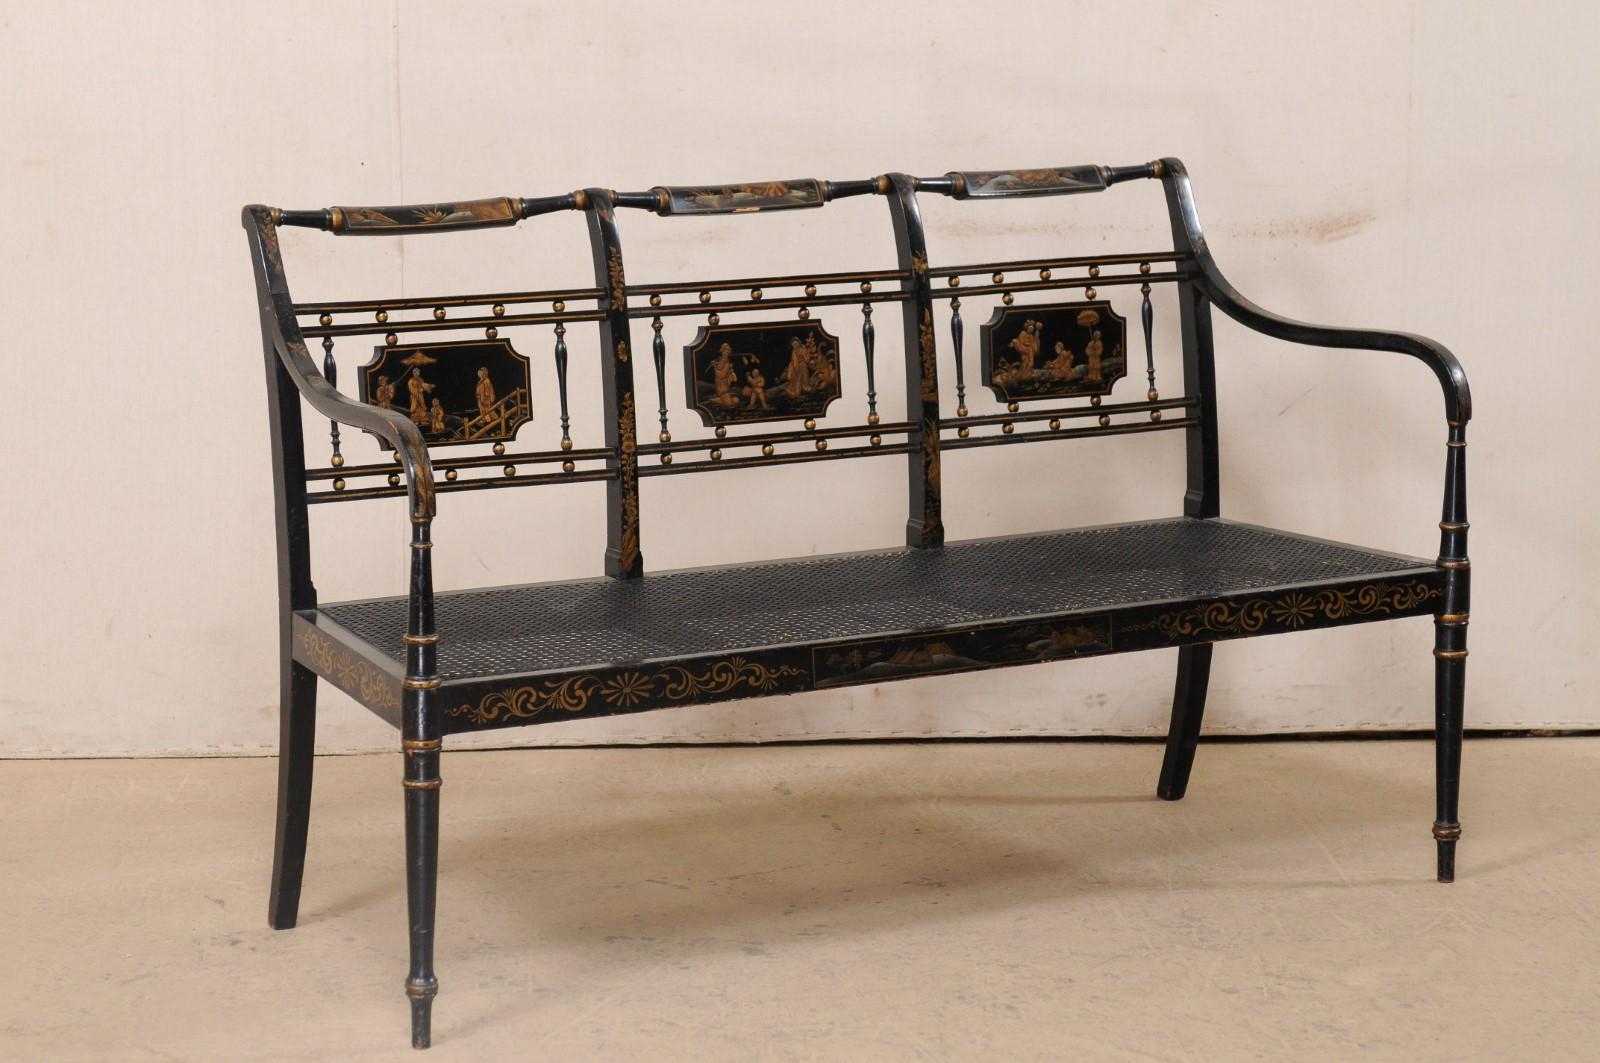 Hand-Woven English Three-Chair Back Bench with Cane Seat and Original Chinoiserie Paint